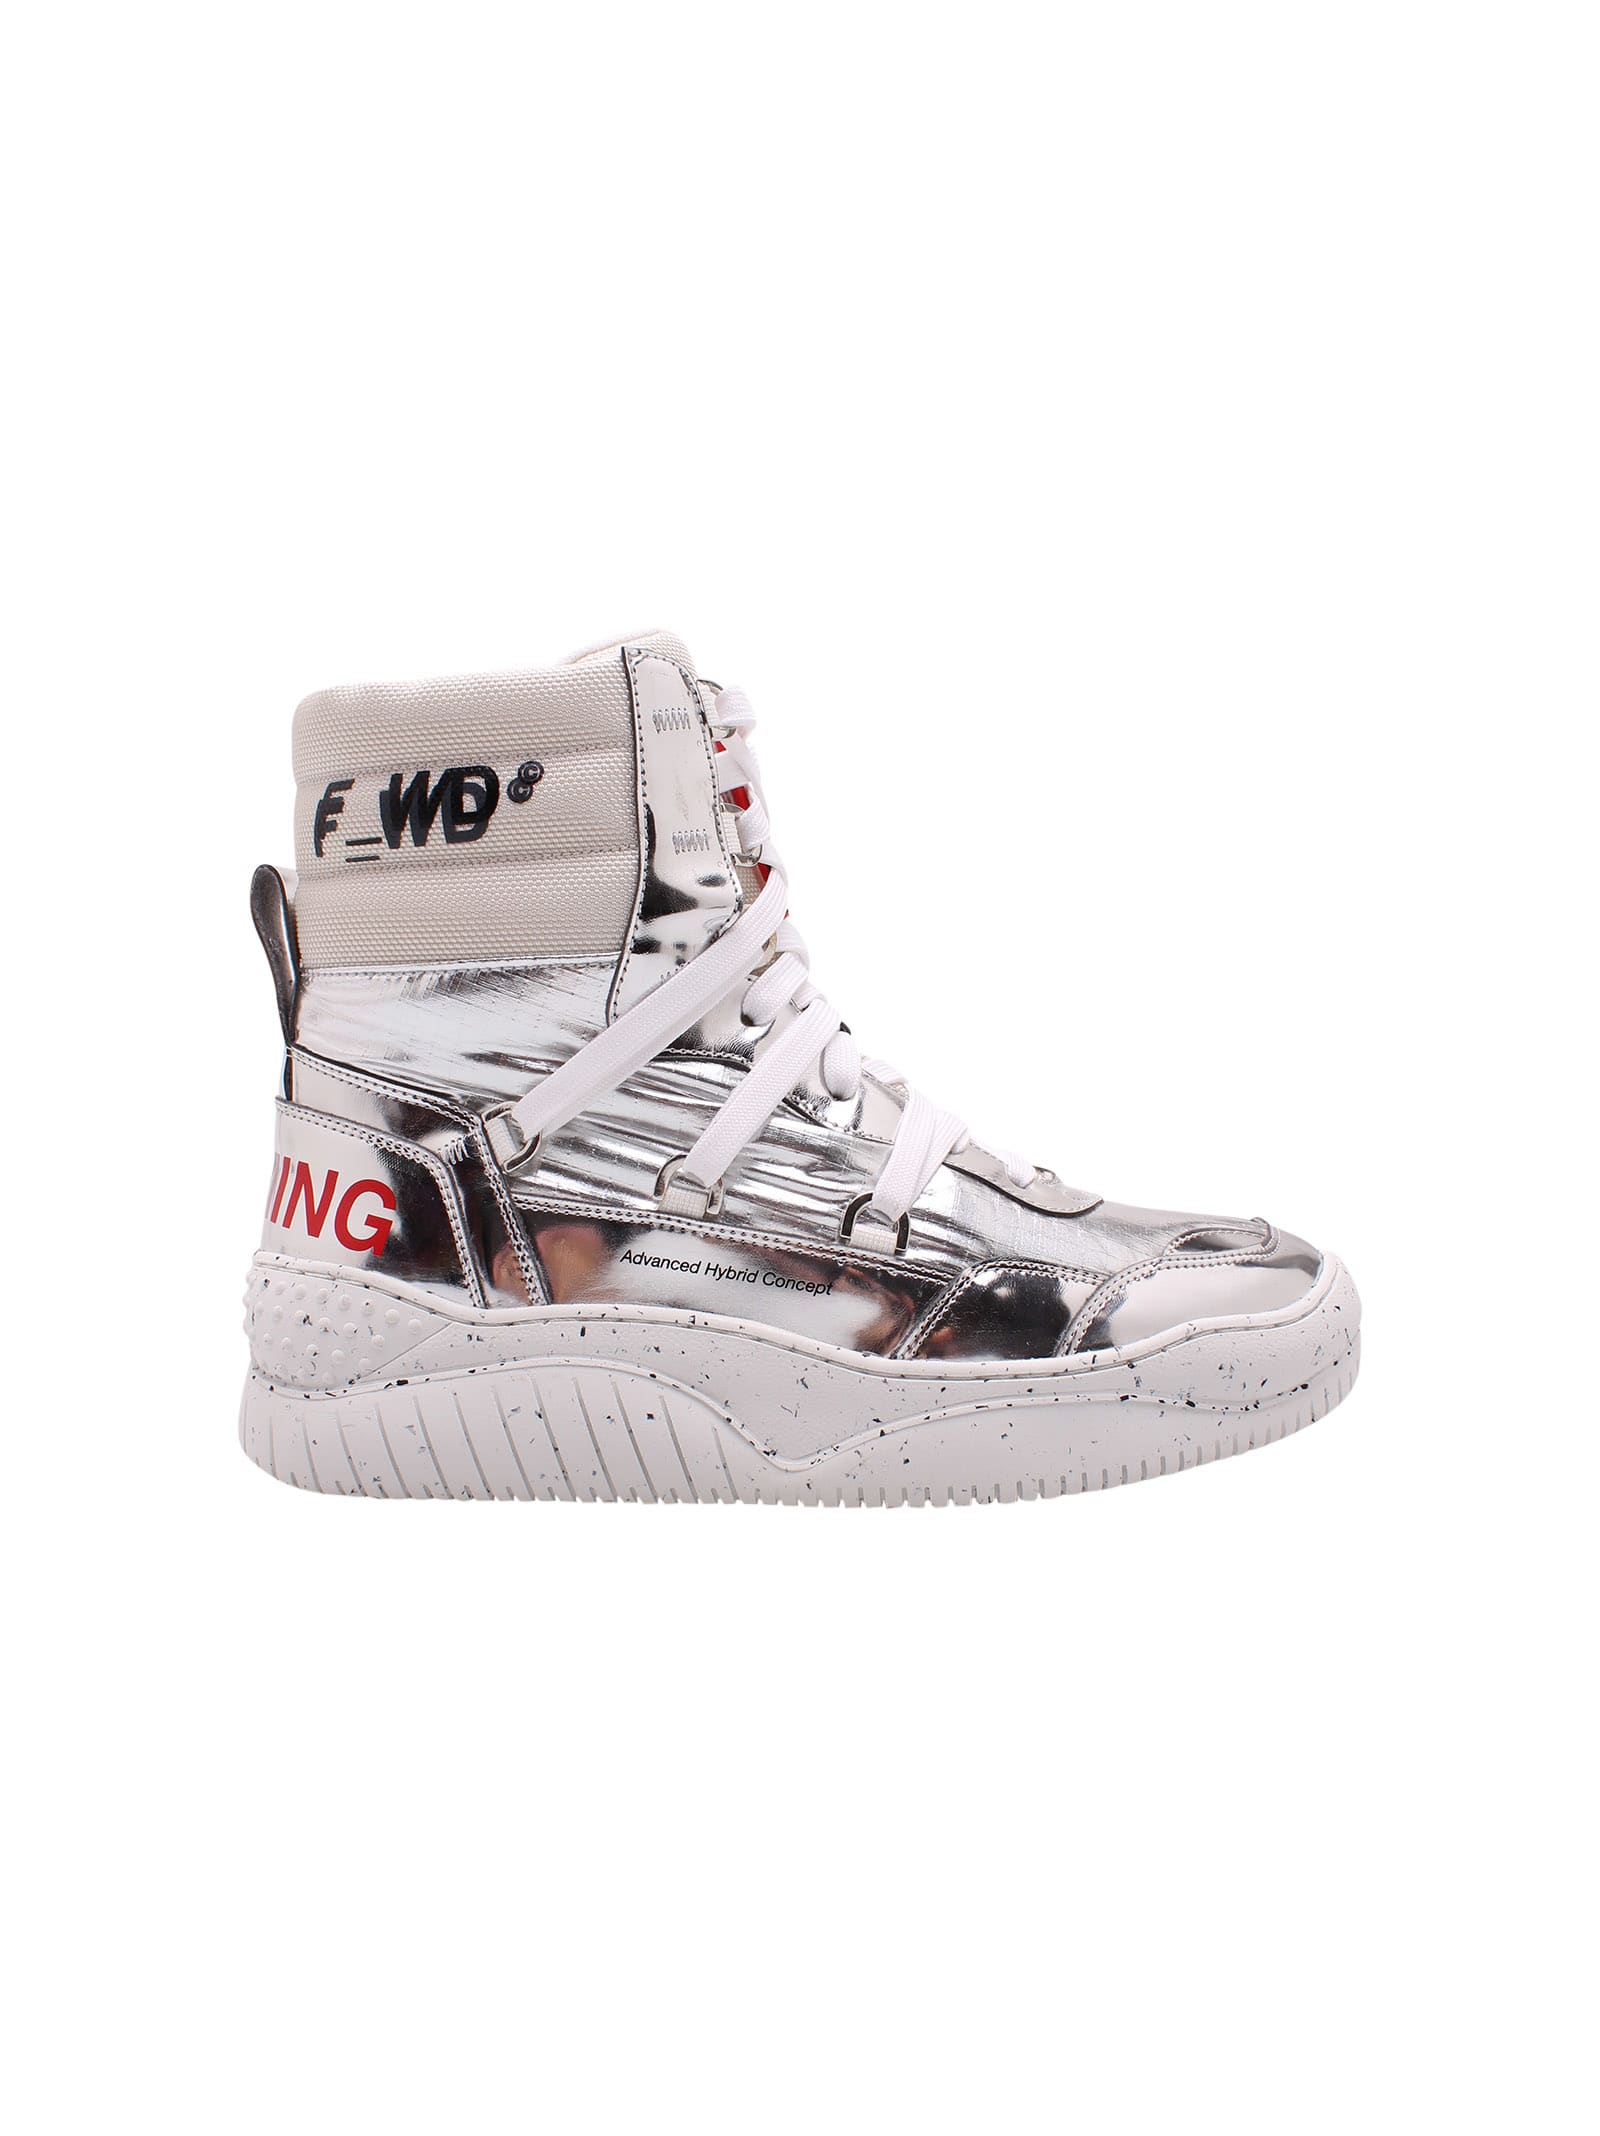 FW D F wd Polyester Sneakers